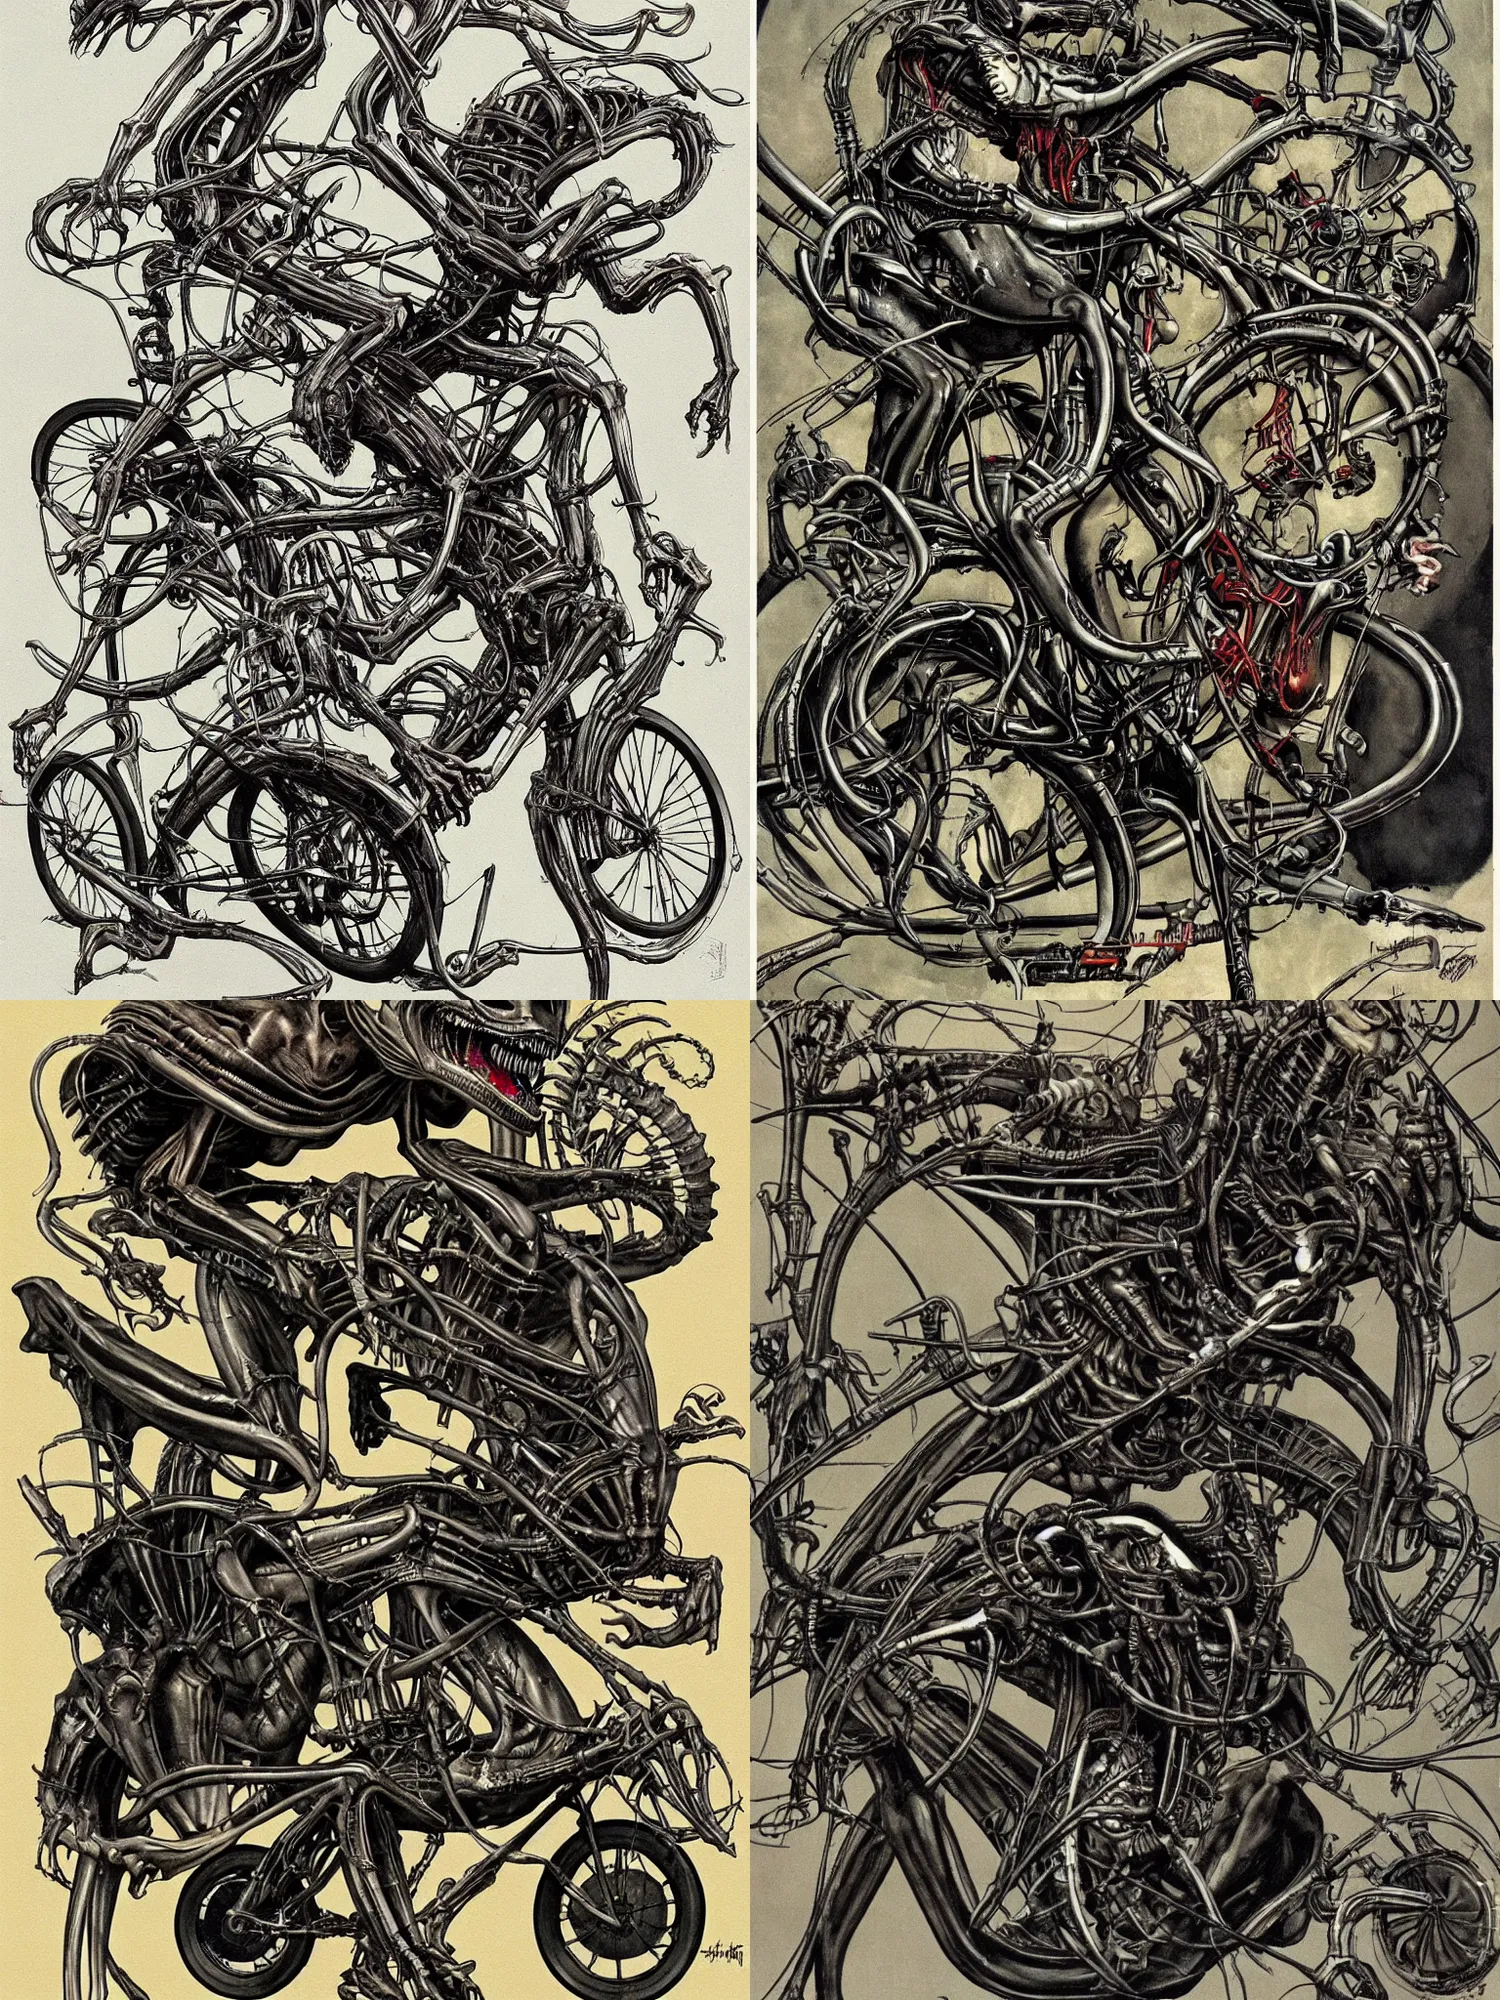 Prompt: a xenomorph by hr giger riding a bicycle art style norman rockwell